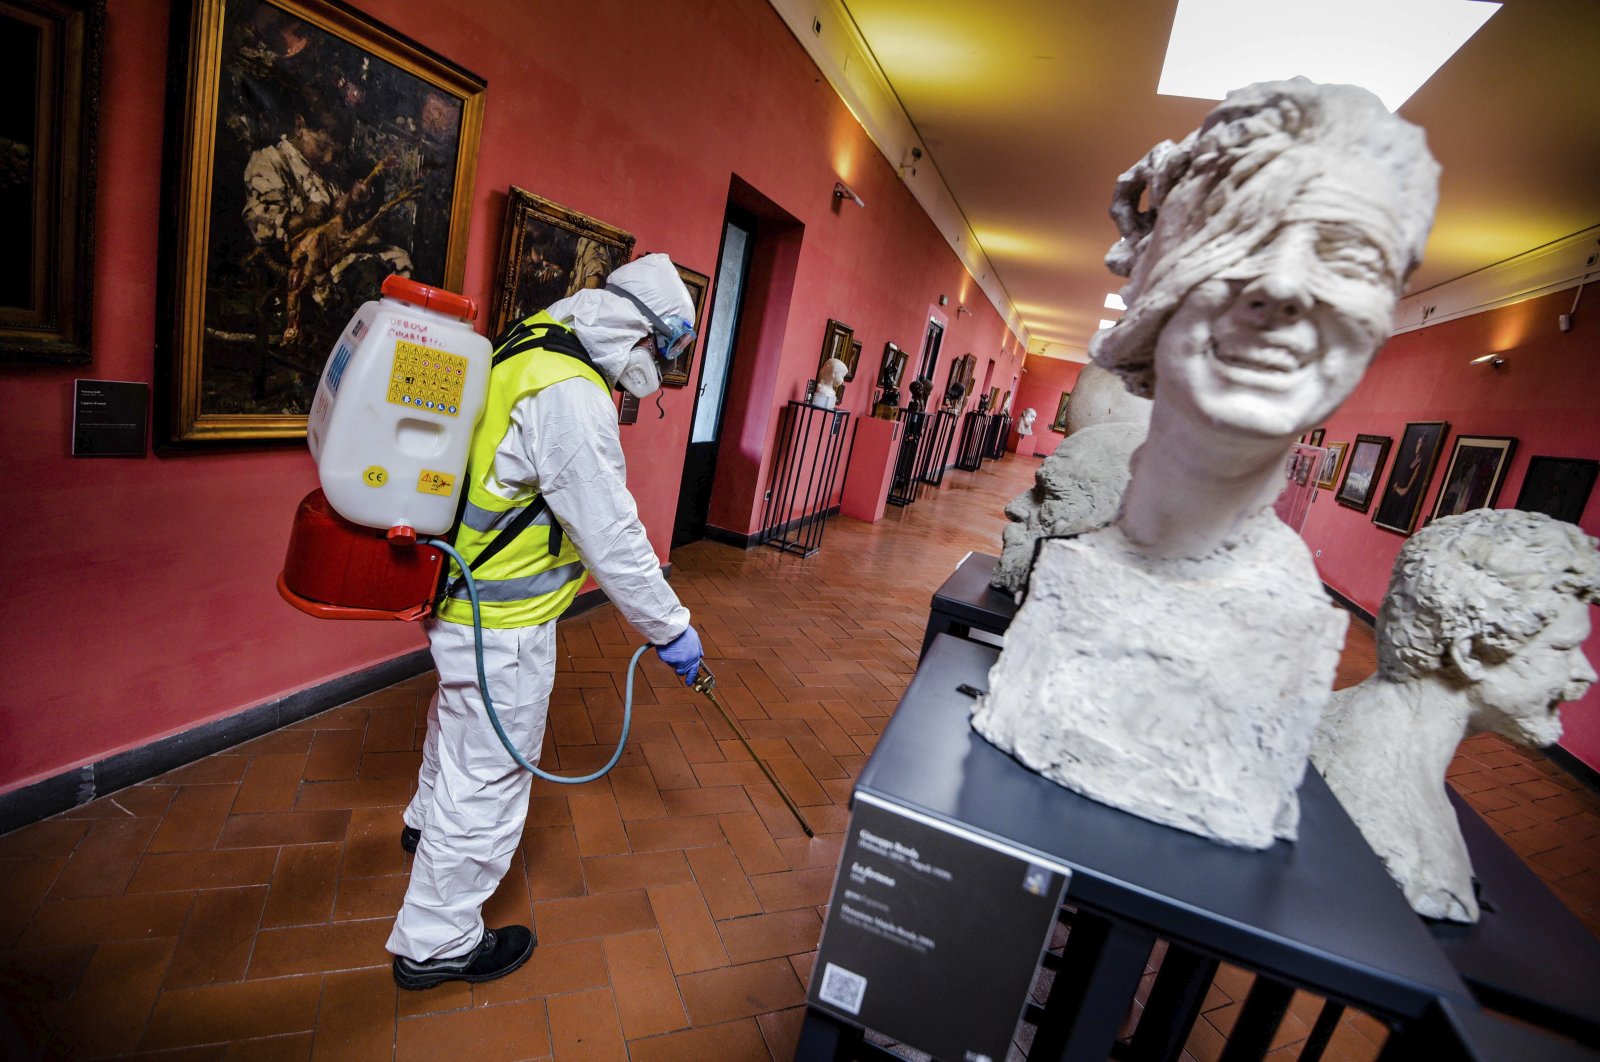 A worker sprays disinfectant to sanitize against coronavirus in the museum hosted by the Maschio Angioino medieval castle, in Naples, Italy, Tuesday, March 10, 2020. (LaPresse via AP)